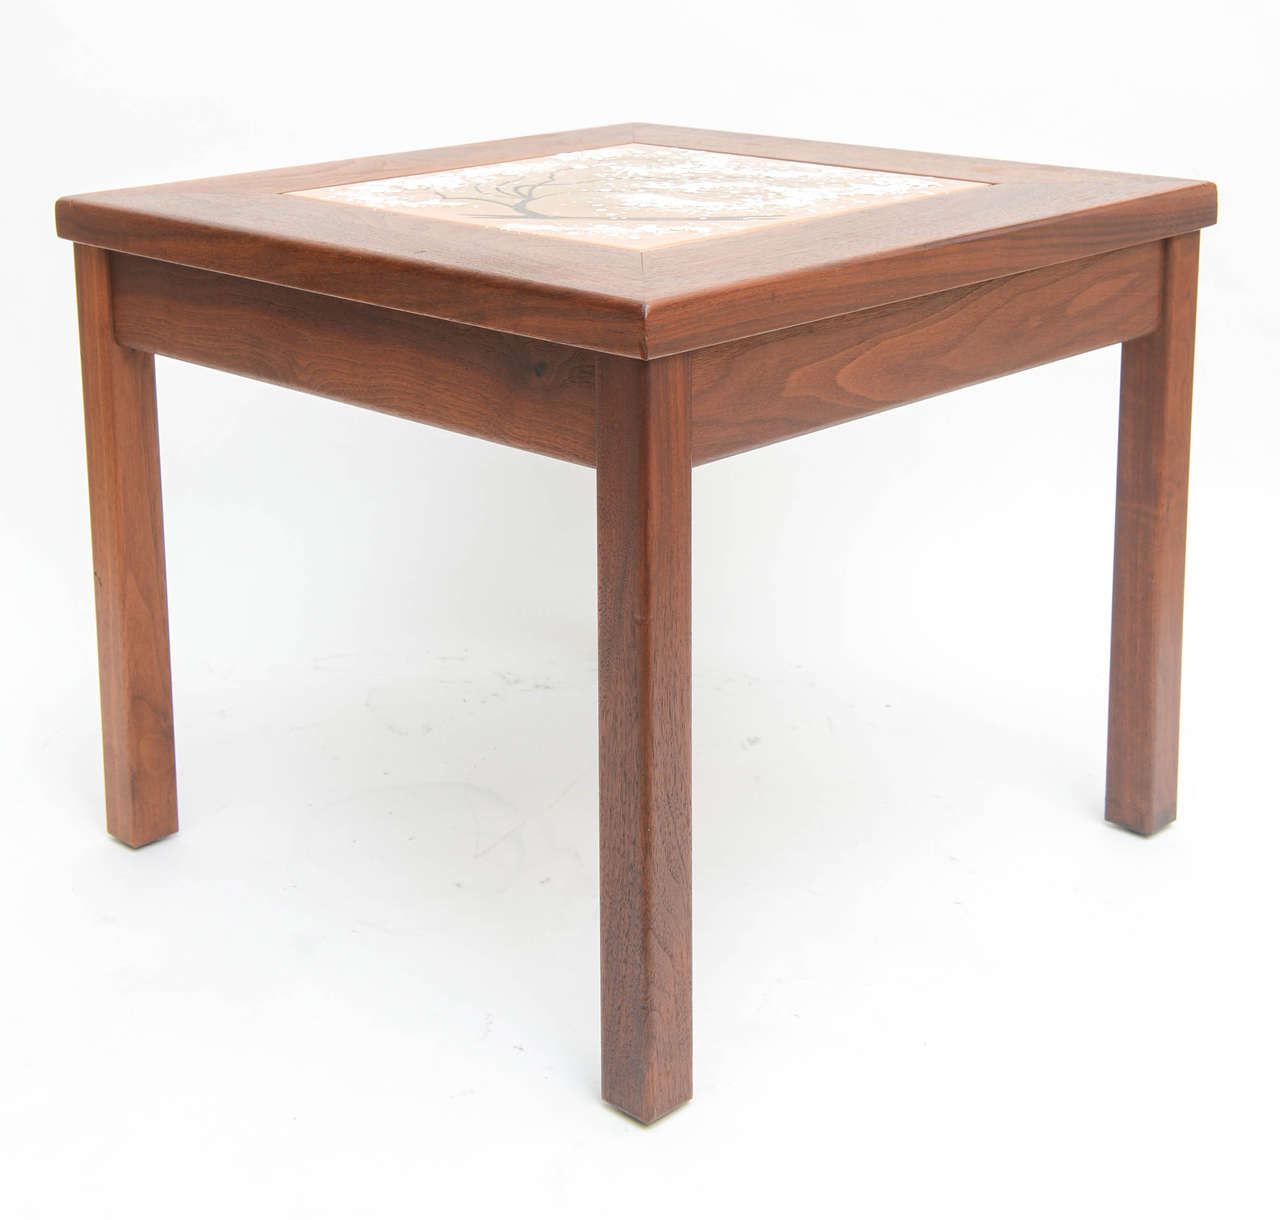 Midcentury Modern Walnut Table with an Enamel on Copper Inset by Brown Saltman  In Excellent Condition For Sale In West Palm Beach, FL